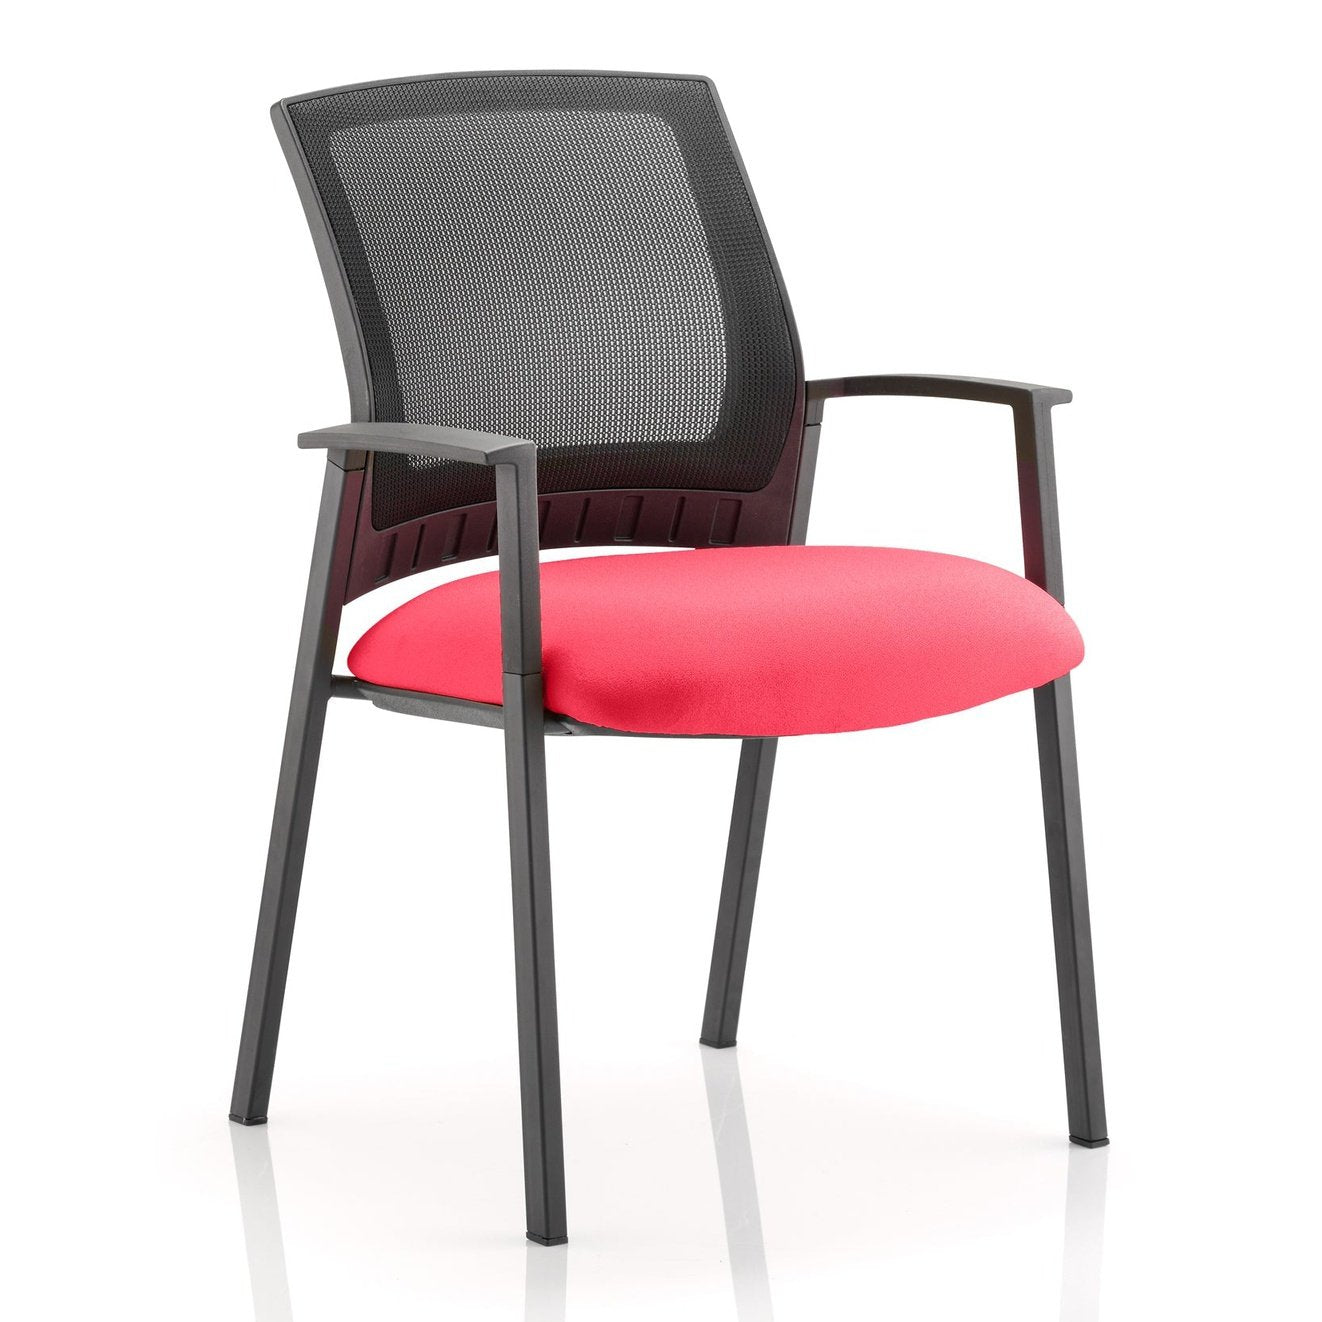 Metro Medium Mesh Back Stacking Visitor Chair with Arms - Pre-Assembled, 115kg Capacity, 8hr Usage, 2yr Guarantee